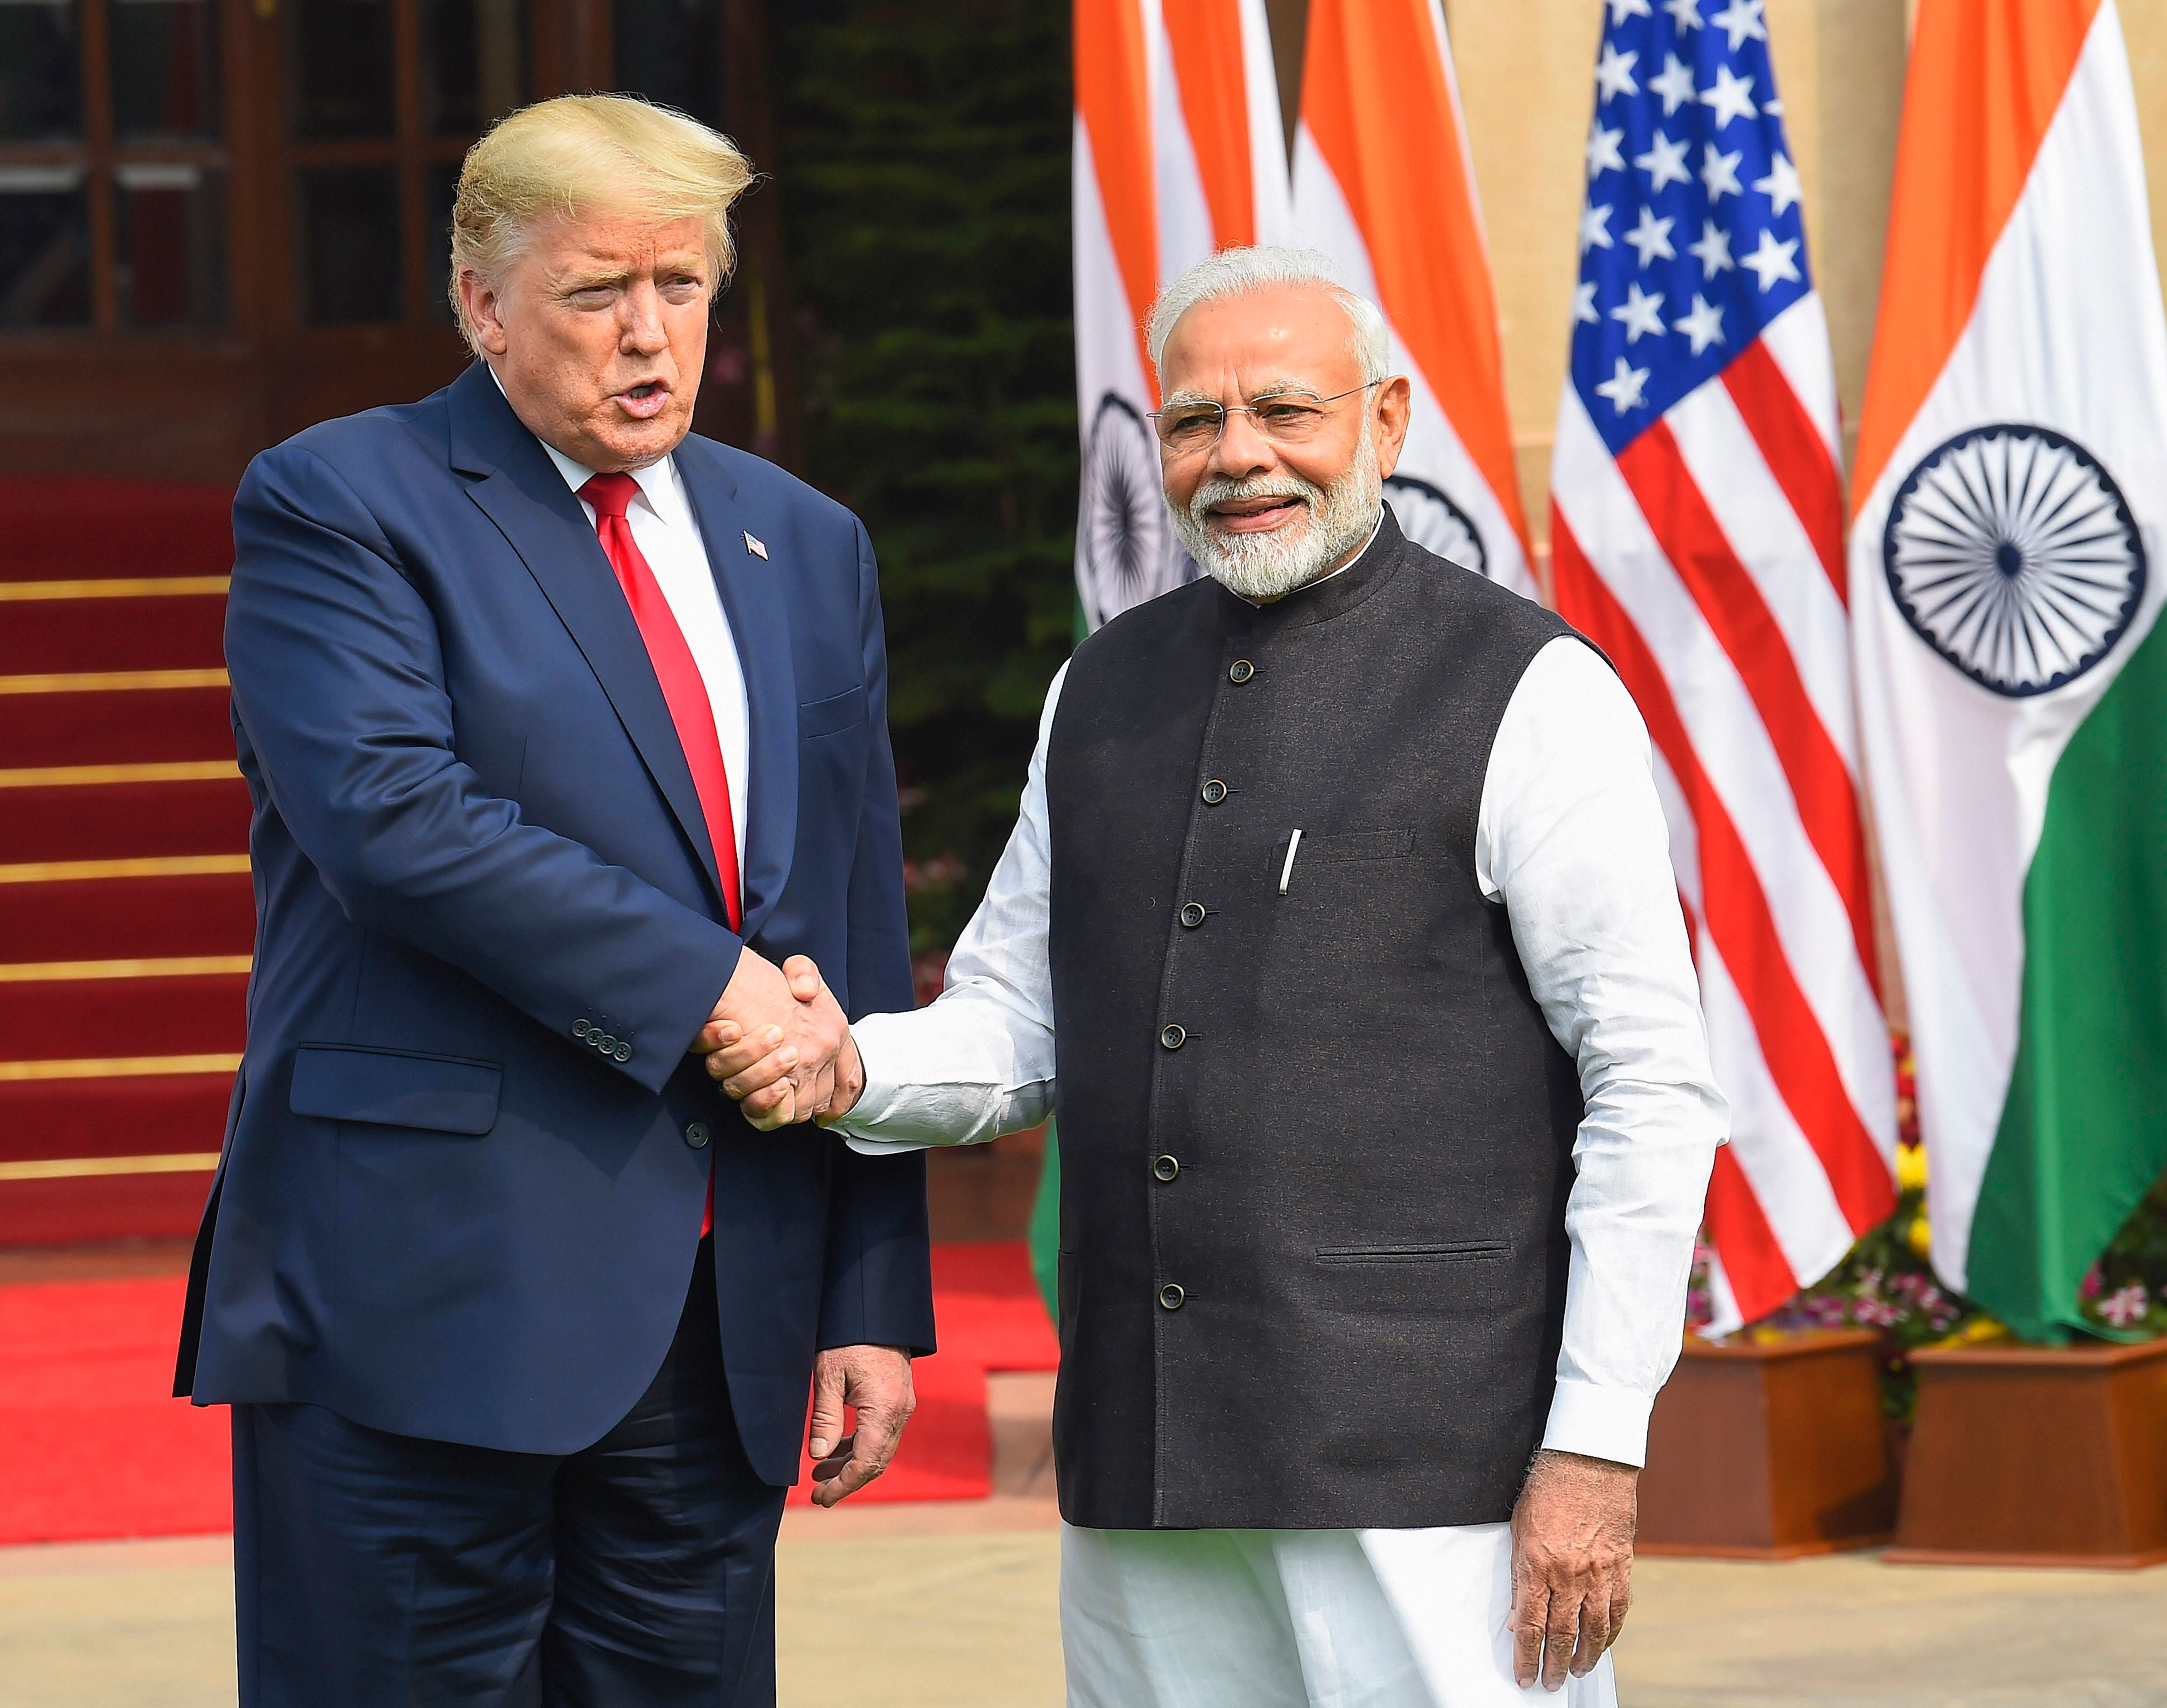 Prime Minister Narendra Modi shakes hands with US President Donald Trump prior to their meeting at Hyderabad House. (Credit: PTI Photo)